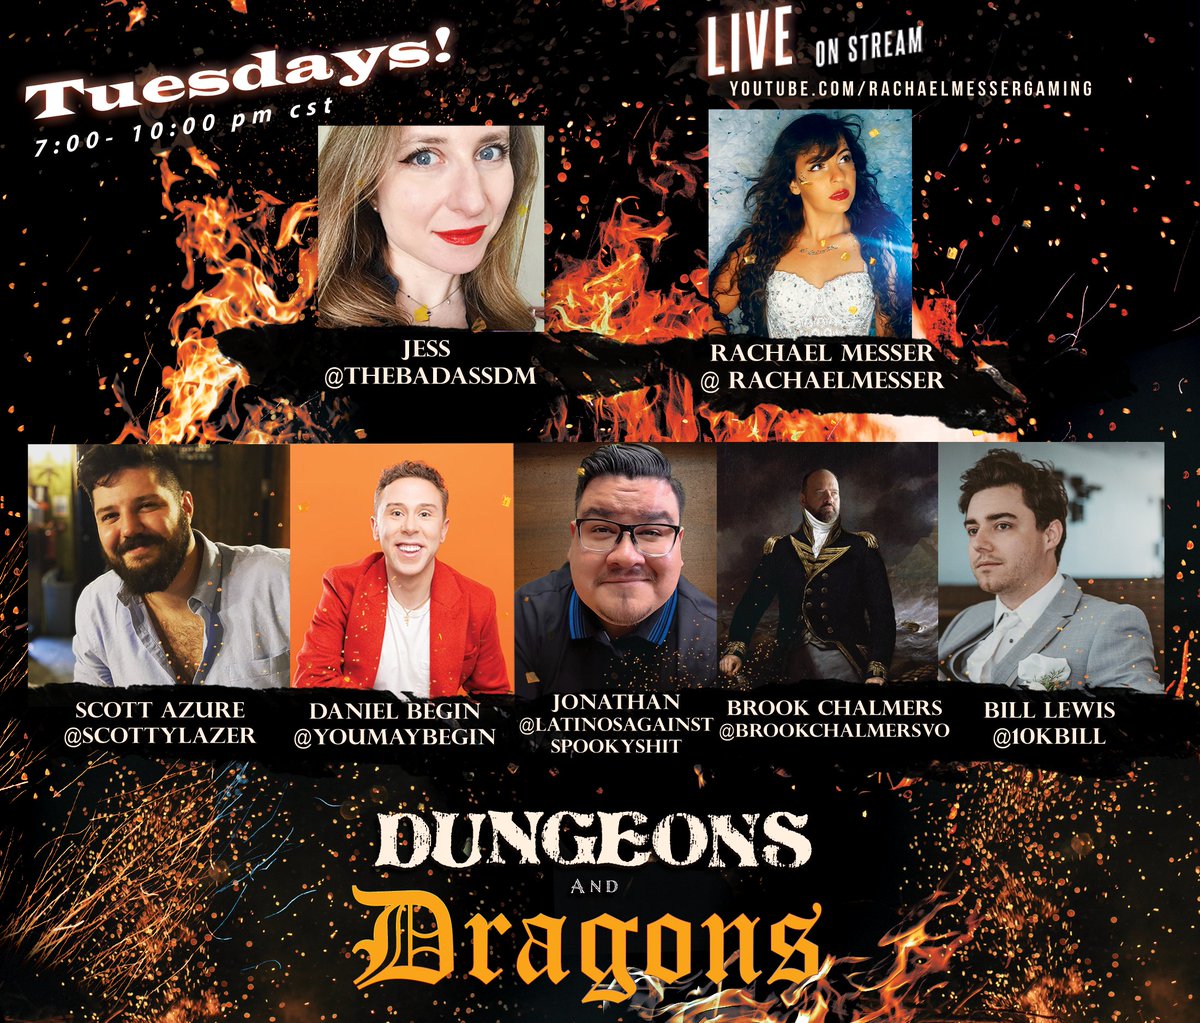 NEW DND CAST! Starting THIS Tuesday at 7 pm cst Join Me as Castien, The Nature Cleric StormCrowJess as the DM! @ScottyLazer as Damian. The Bard Youmaybegin as Granny Attie, the Warlock @againstspooky as Harrison, the Sorcerer @brookchalmersvo as Vrithelion, the Paladin @10kBill…